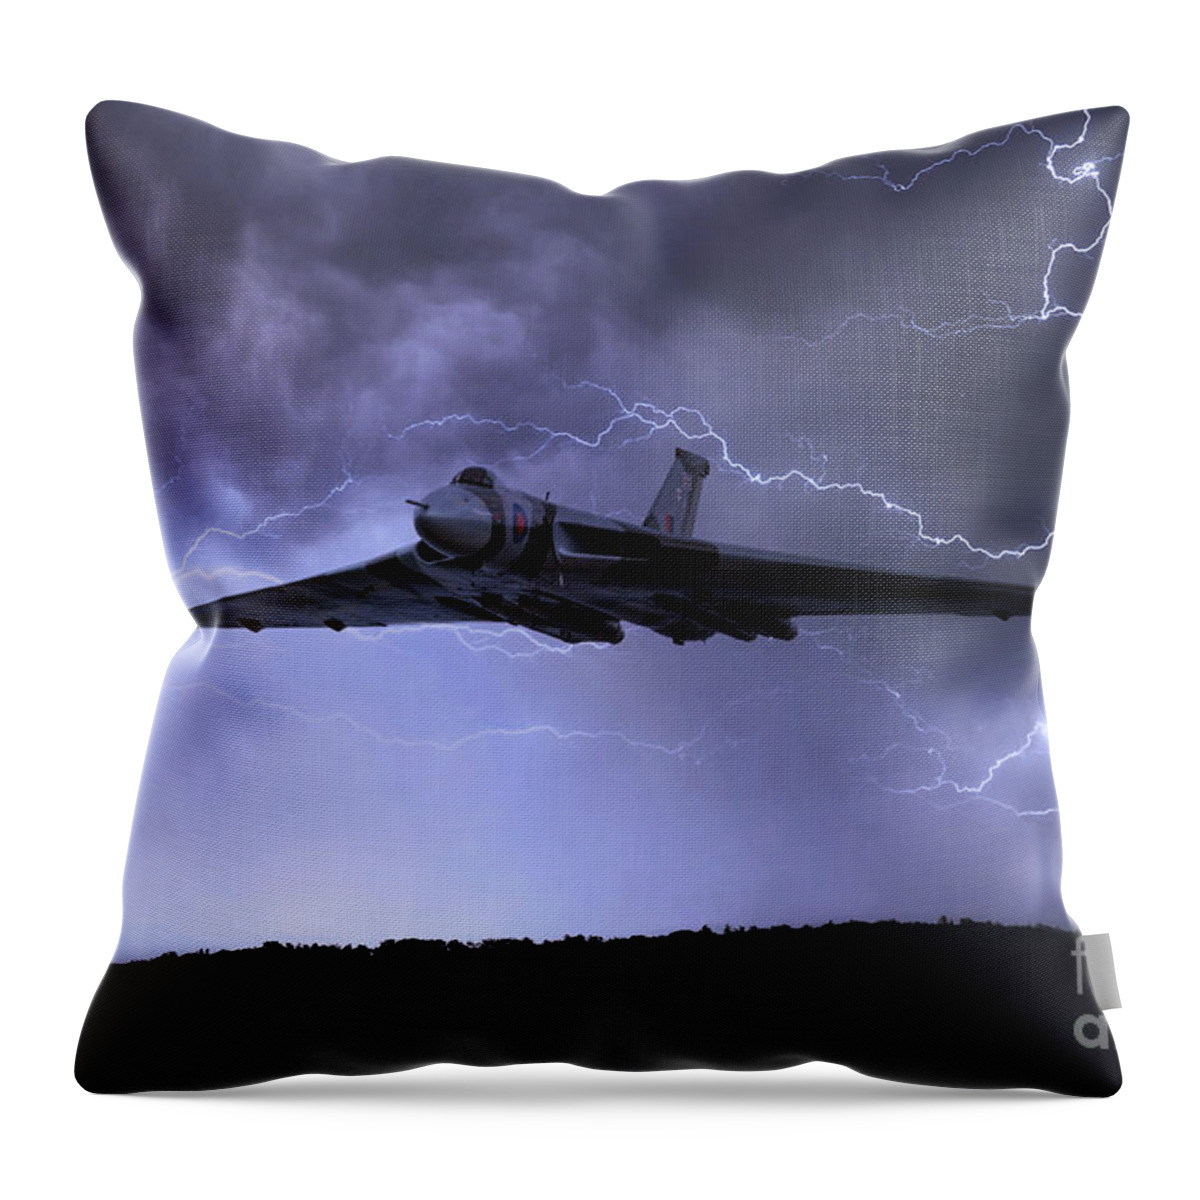 Avro Throw Pillow featuring the digital art The Gods Came Calling by Airpower Art